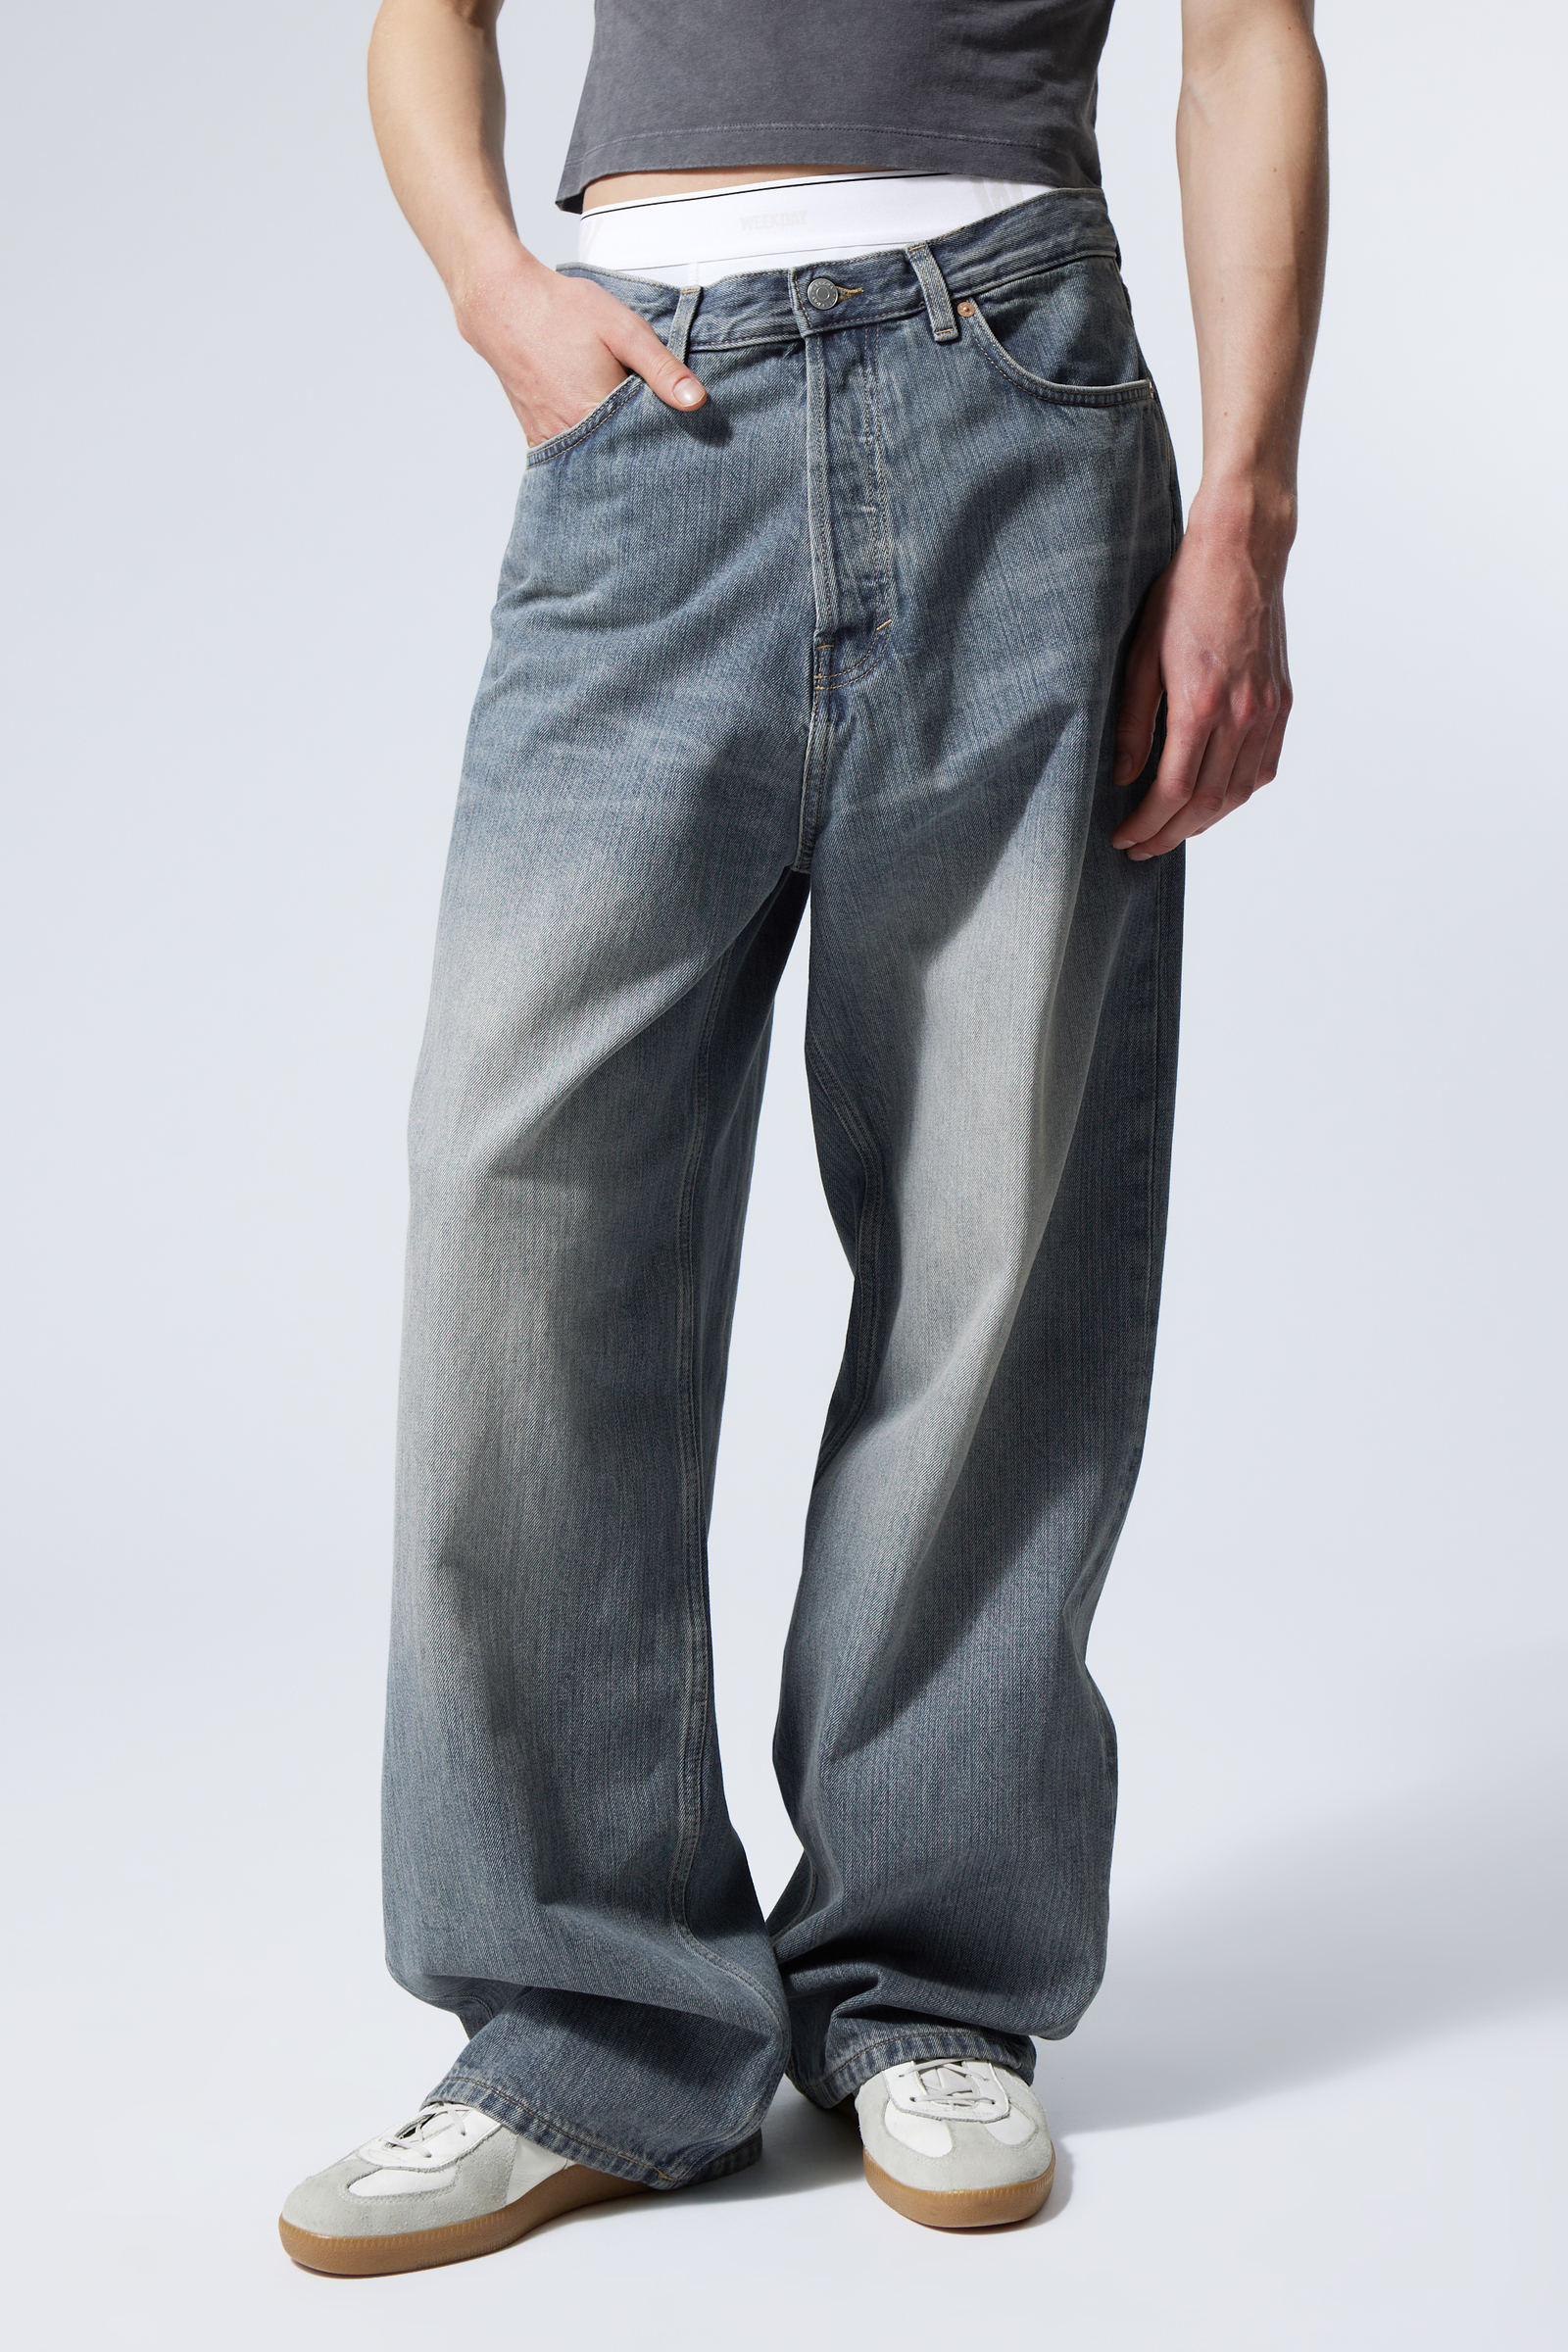 astro loose baggy jeans - Trove Blue | Weekday EU